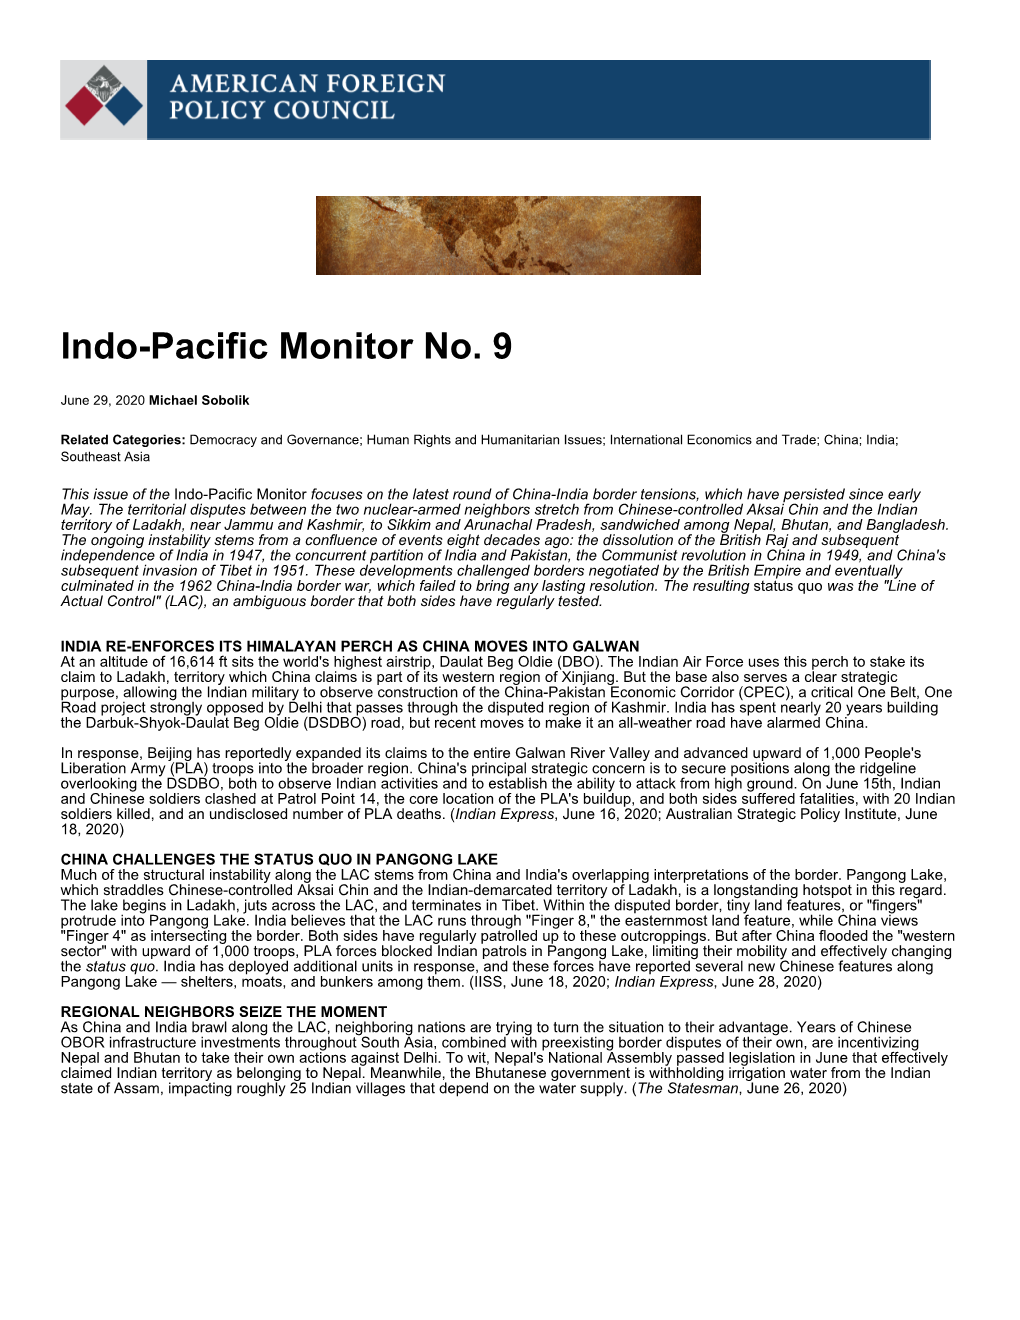 Indo-Pacific Monitor No. 9 | American Foreign Policy Council